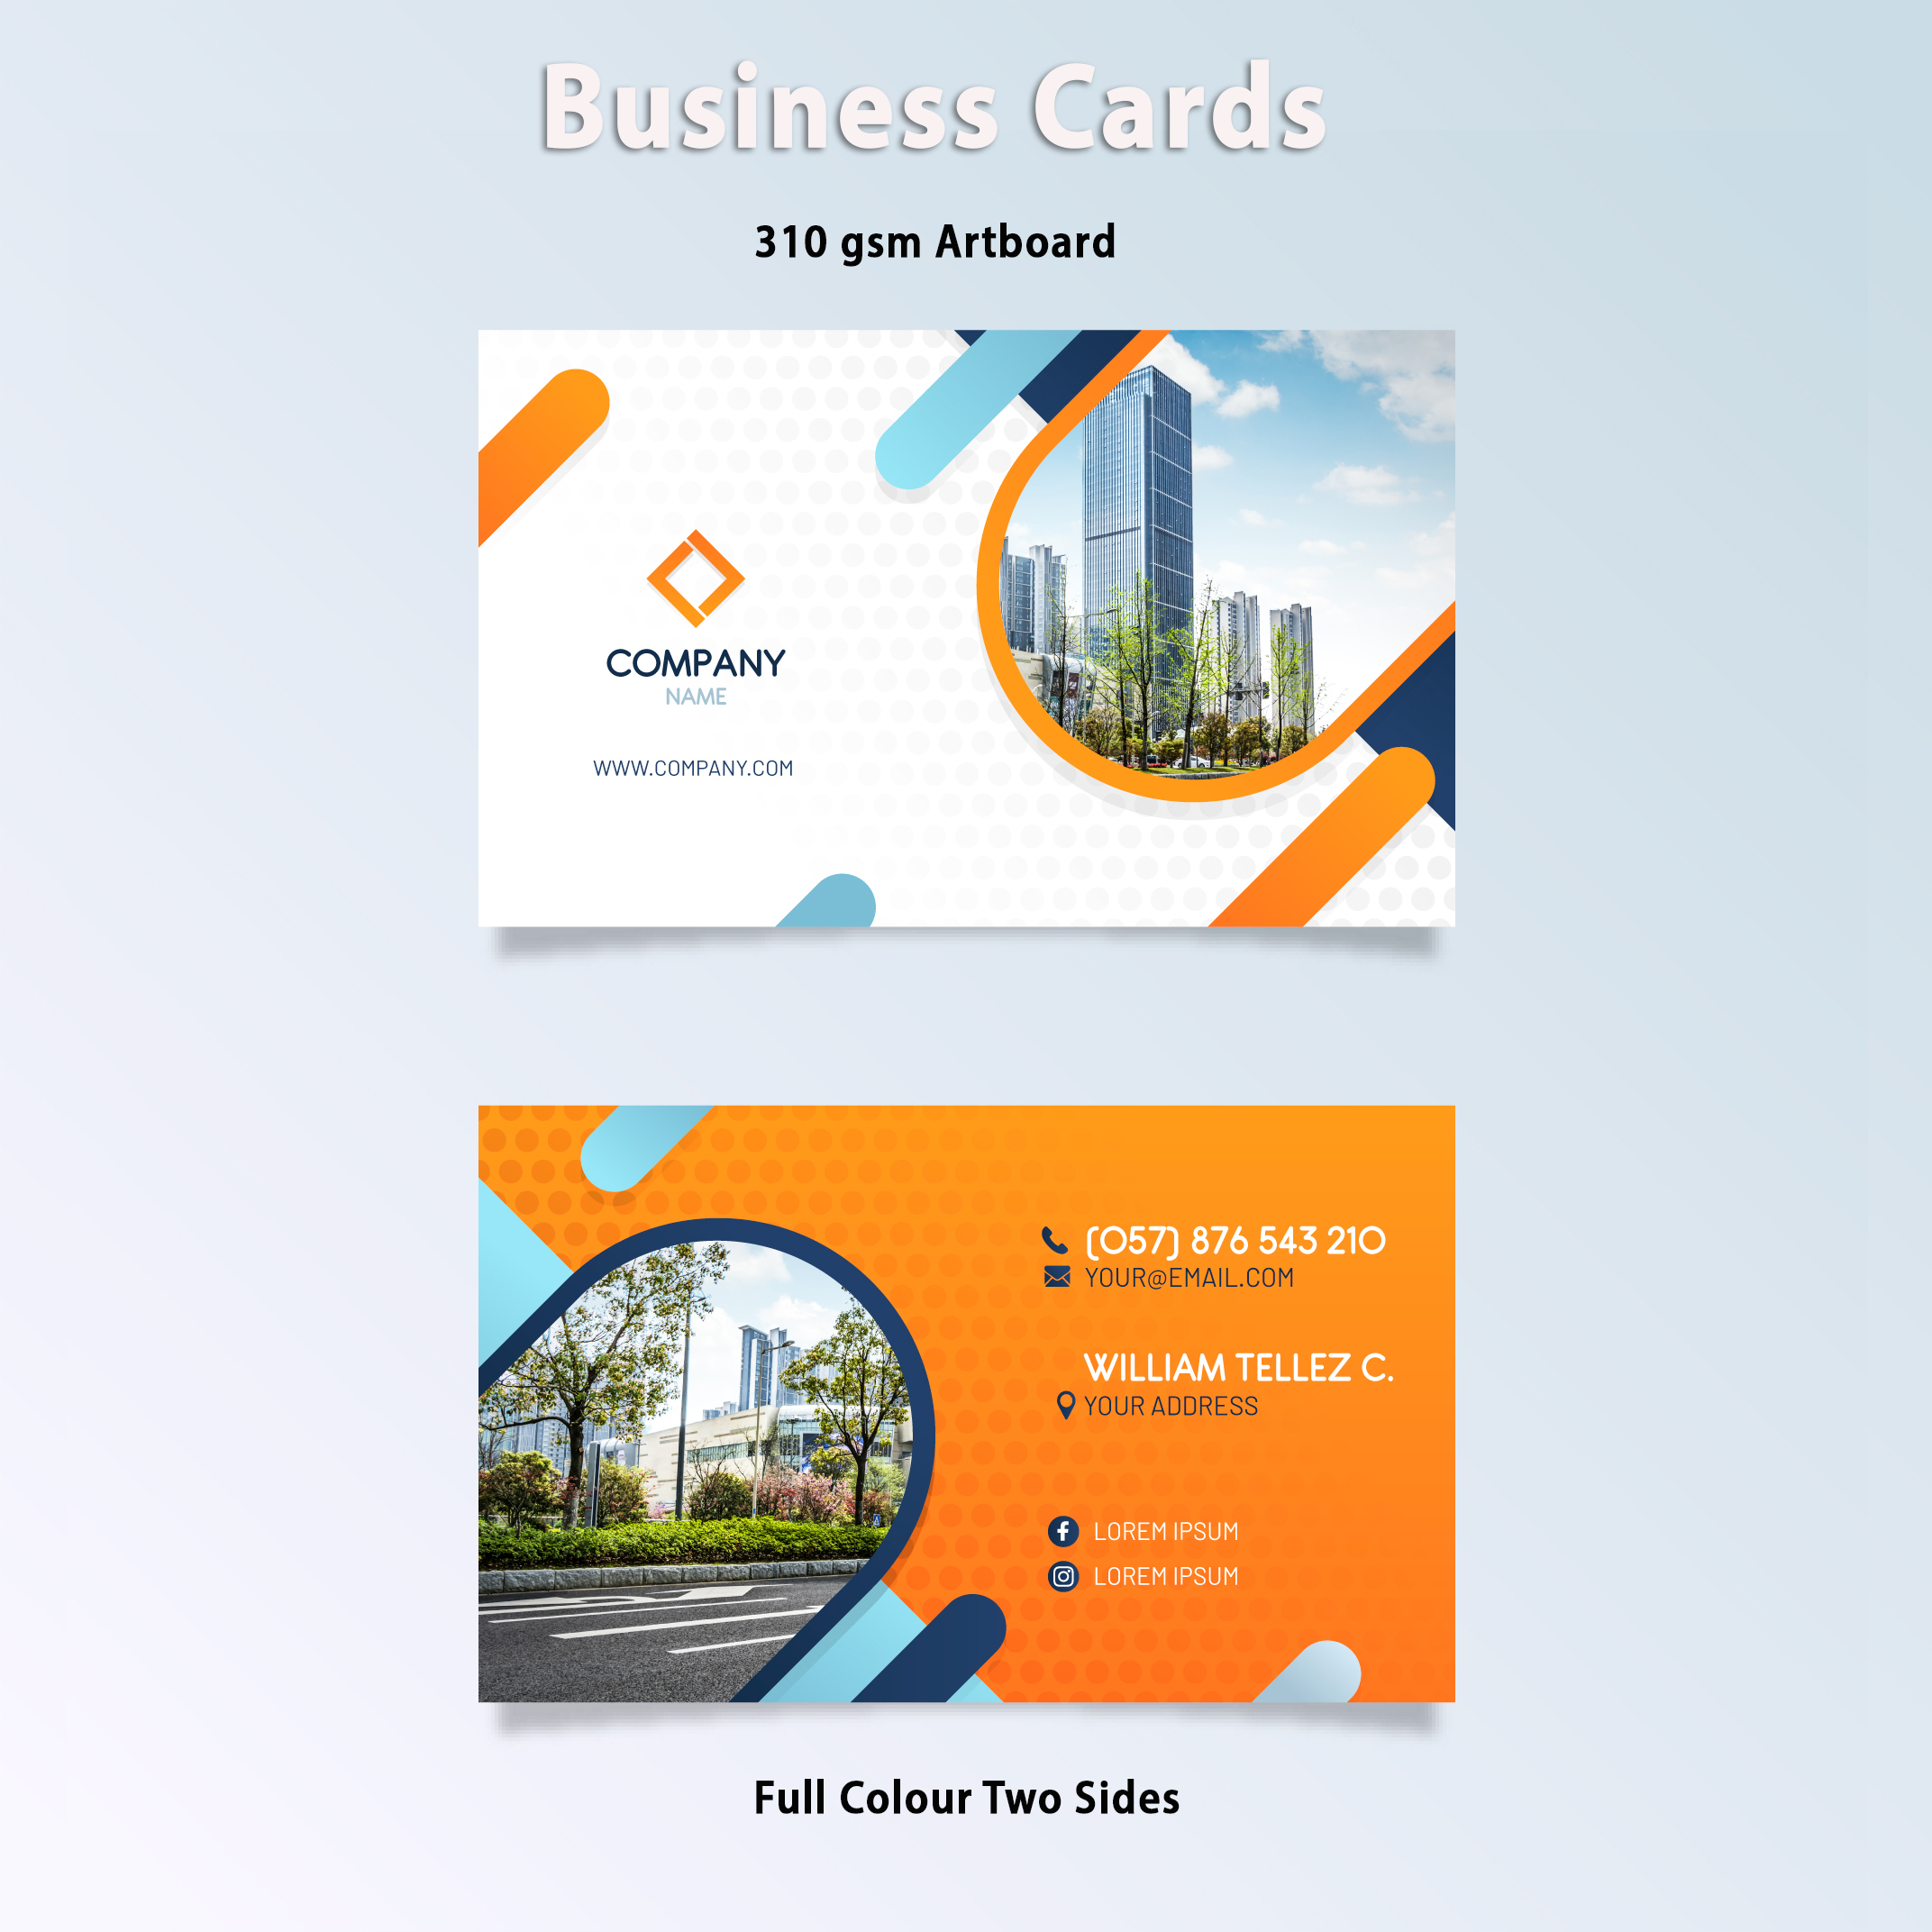 gsm for business cards 2